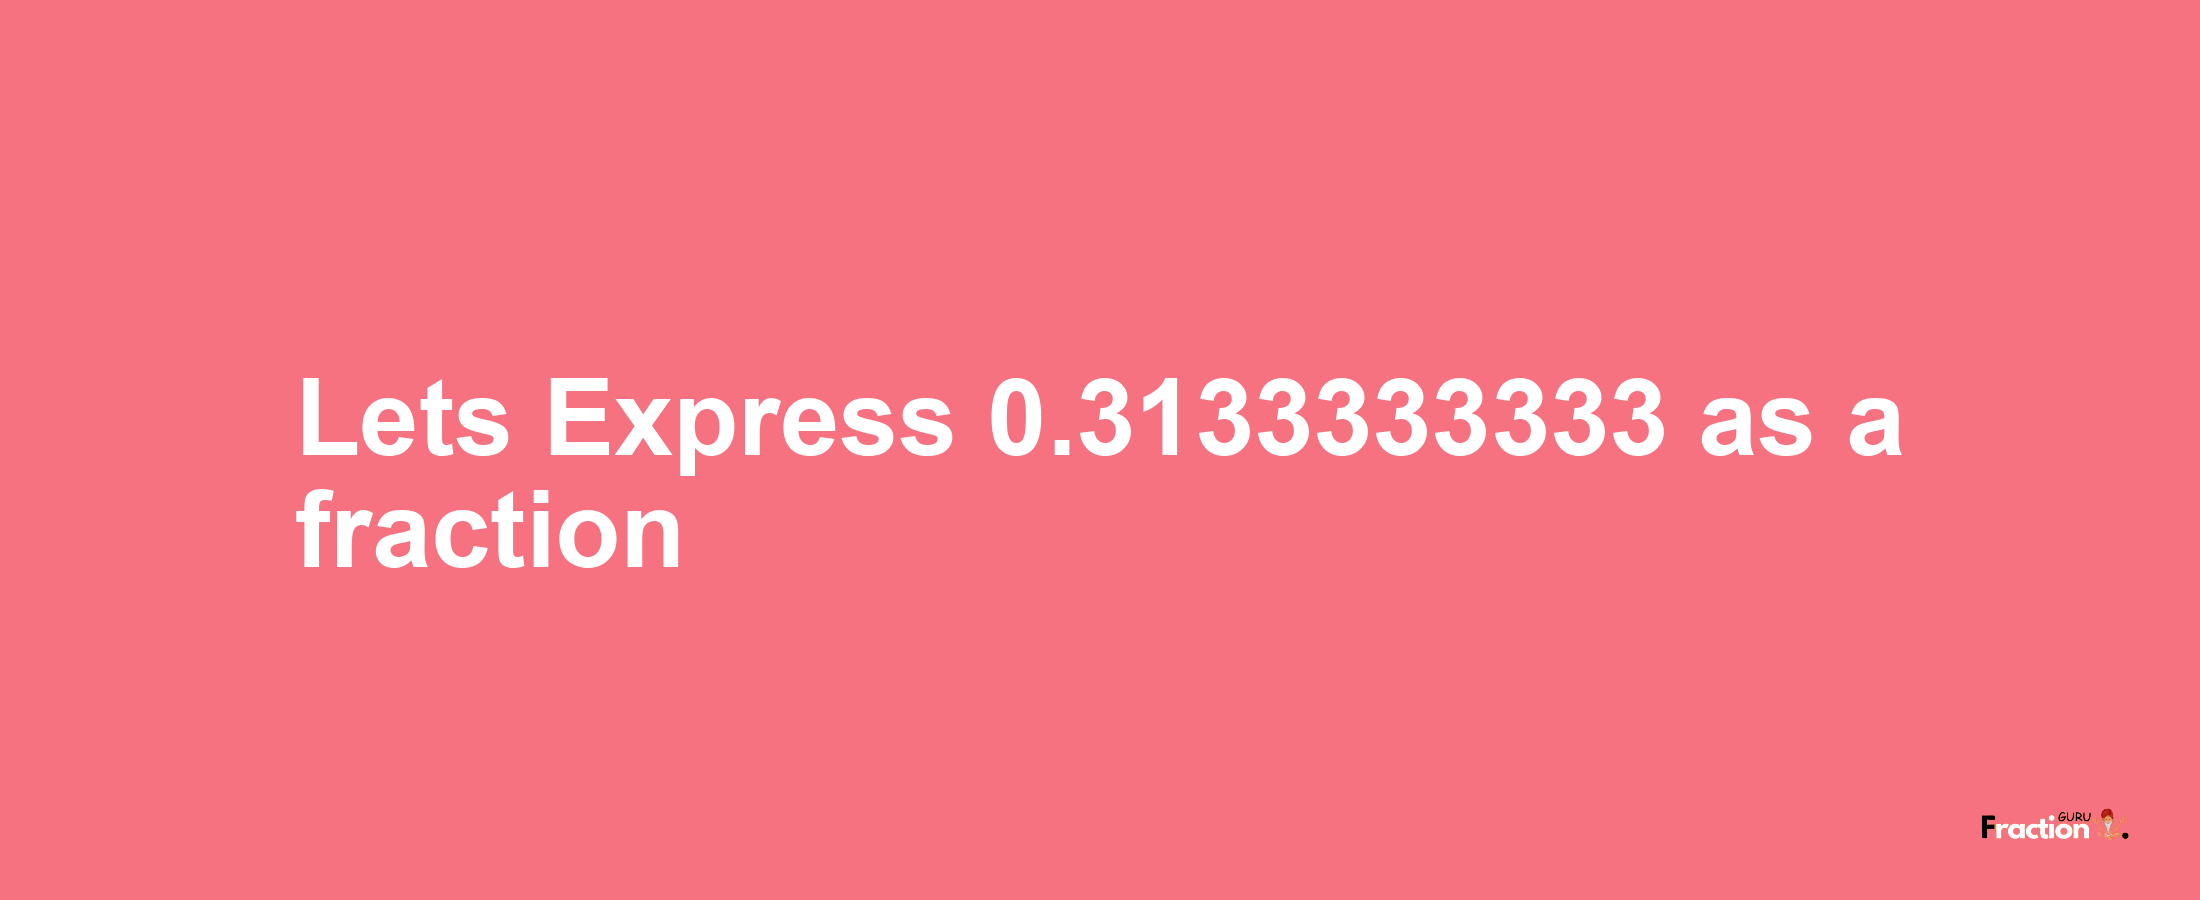 Lets Express 0.3133333333 as afraction